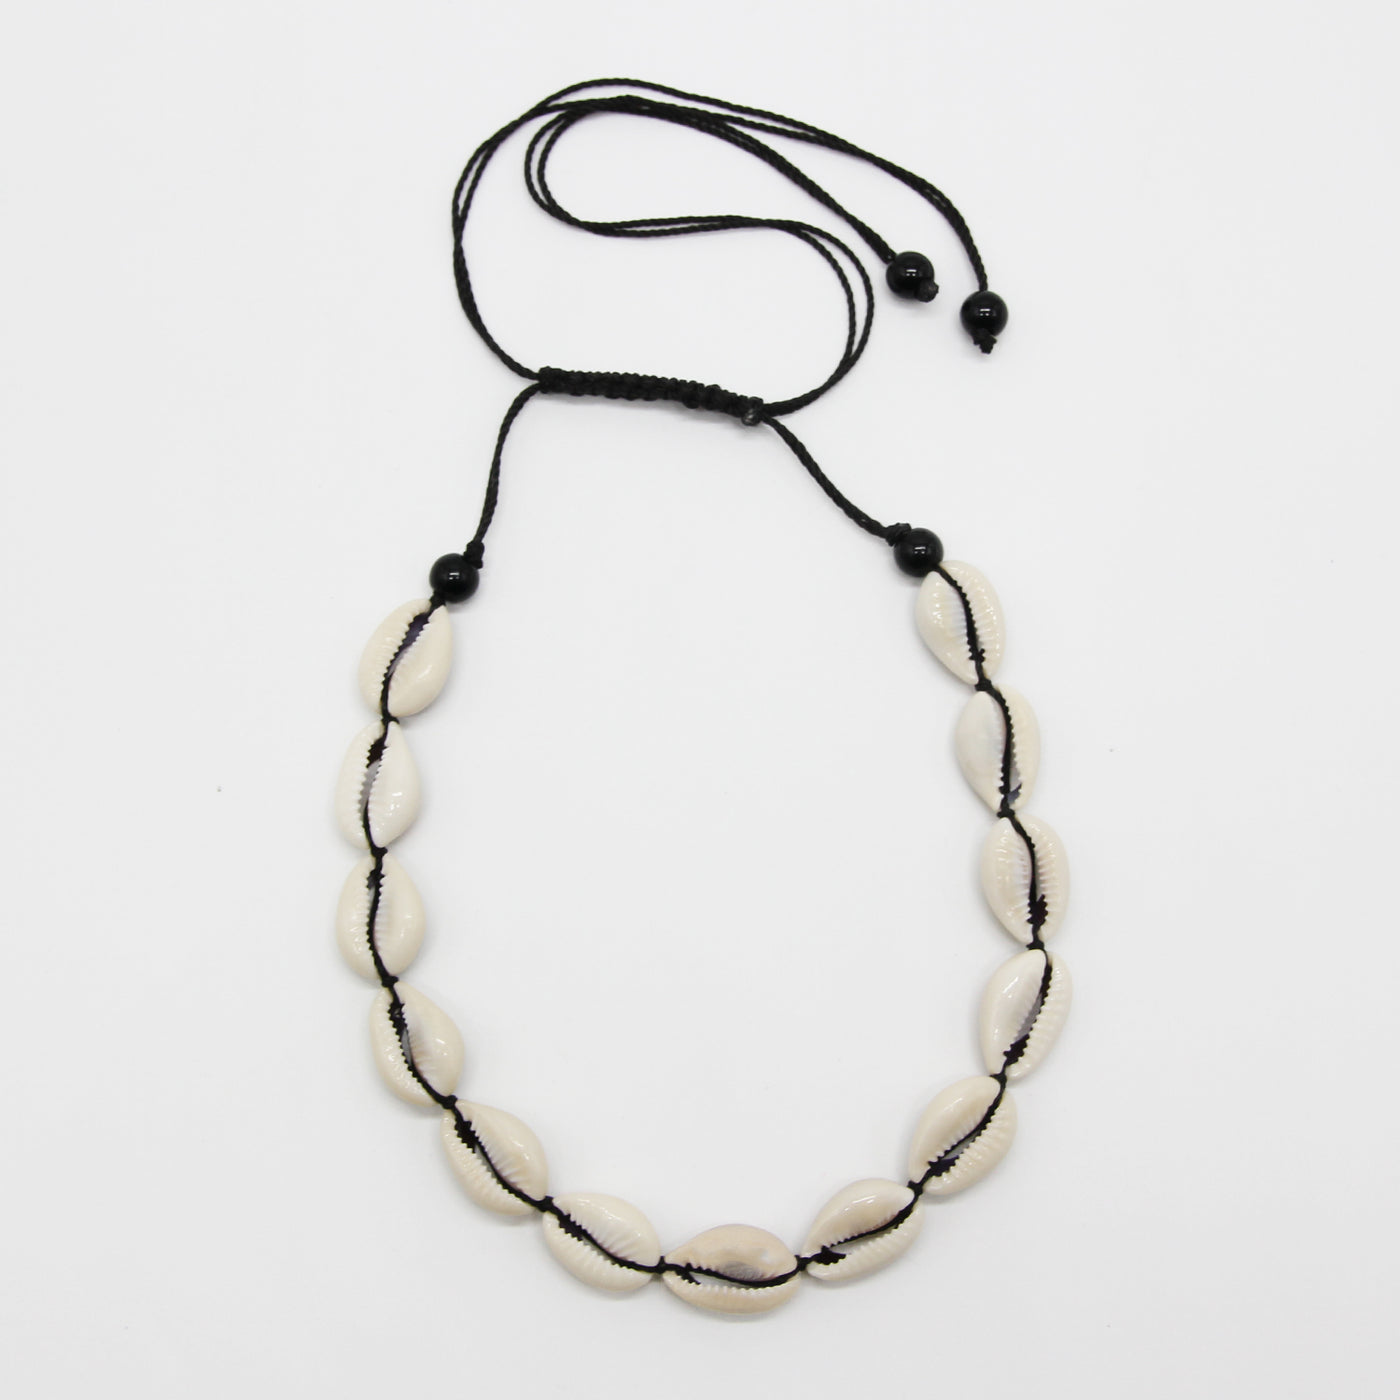 Shell necklace black